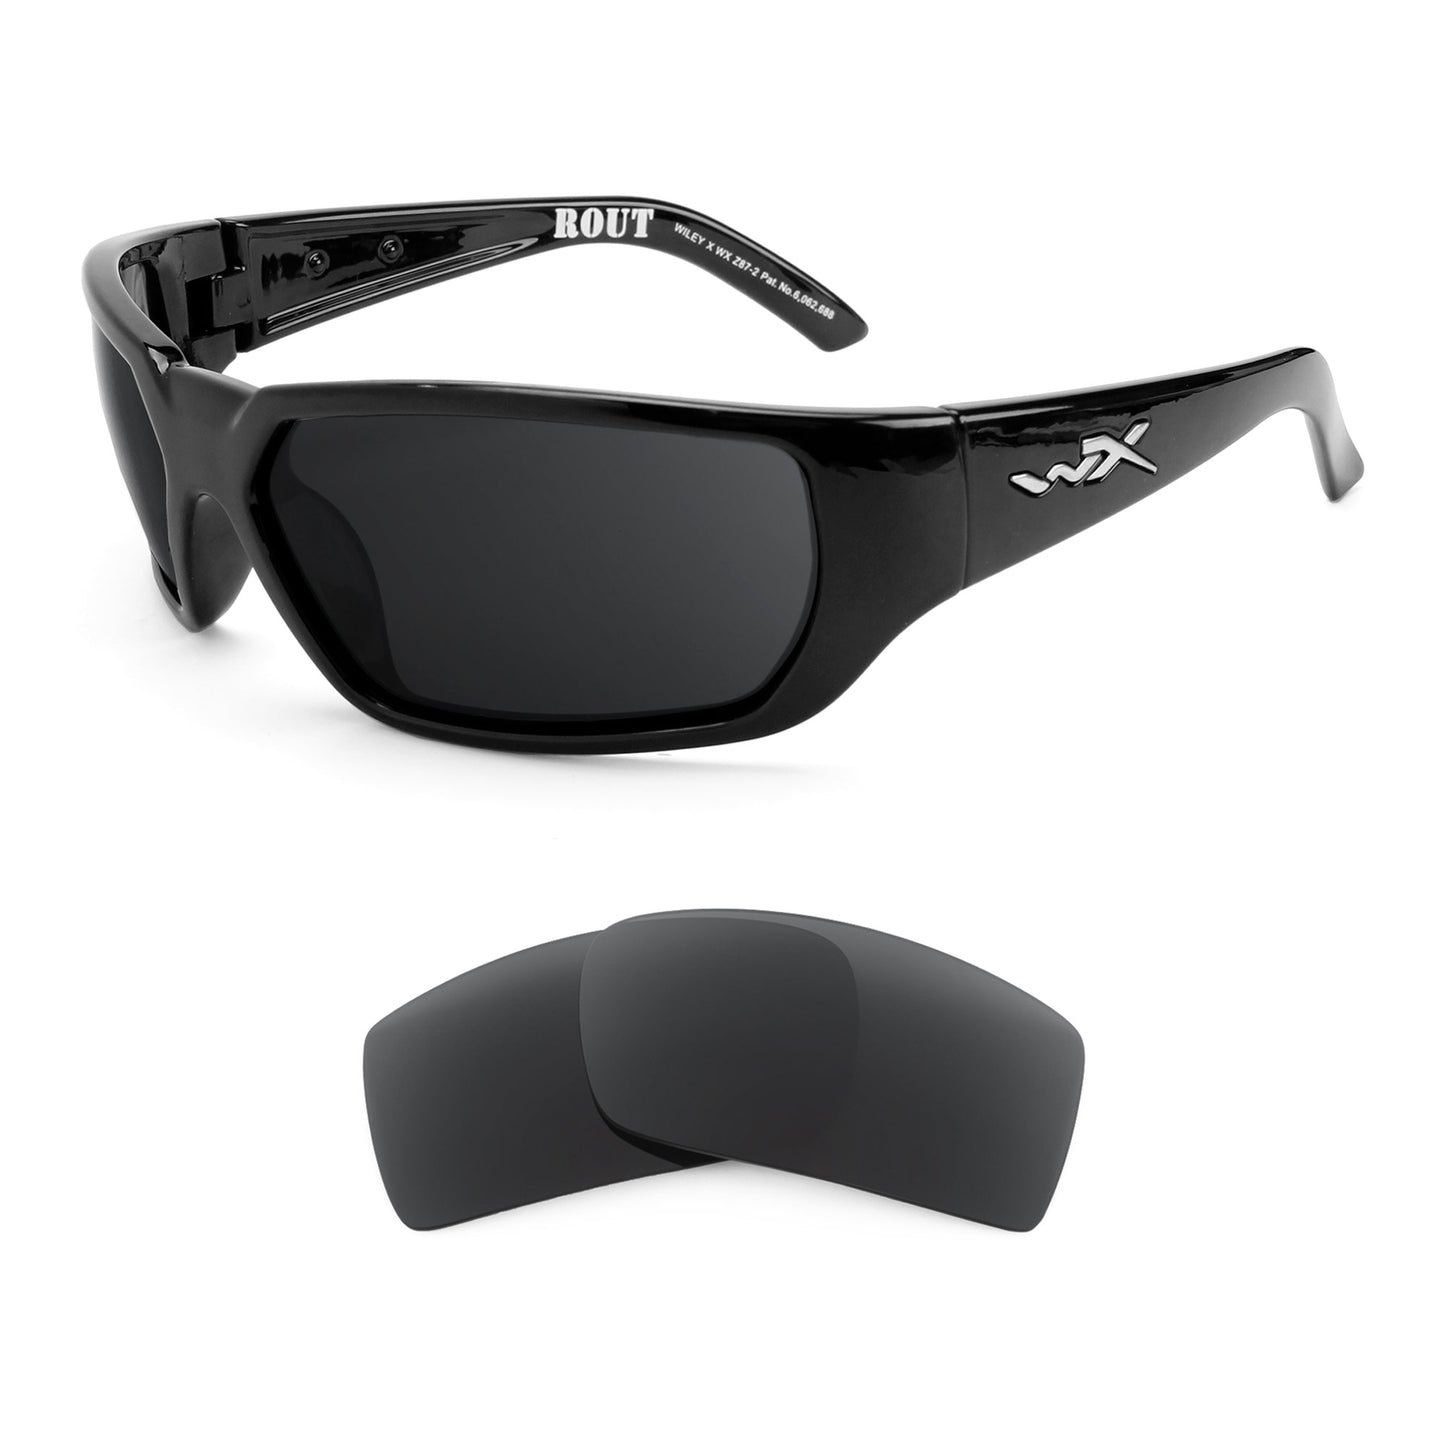 Wiley X Rout sunglasses with replacement lenses